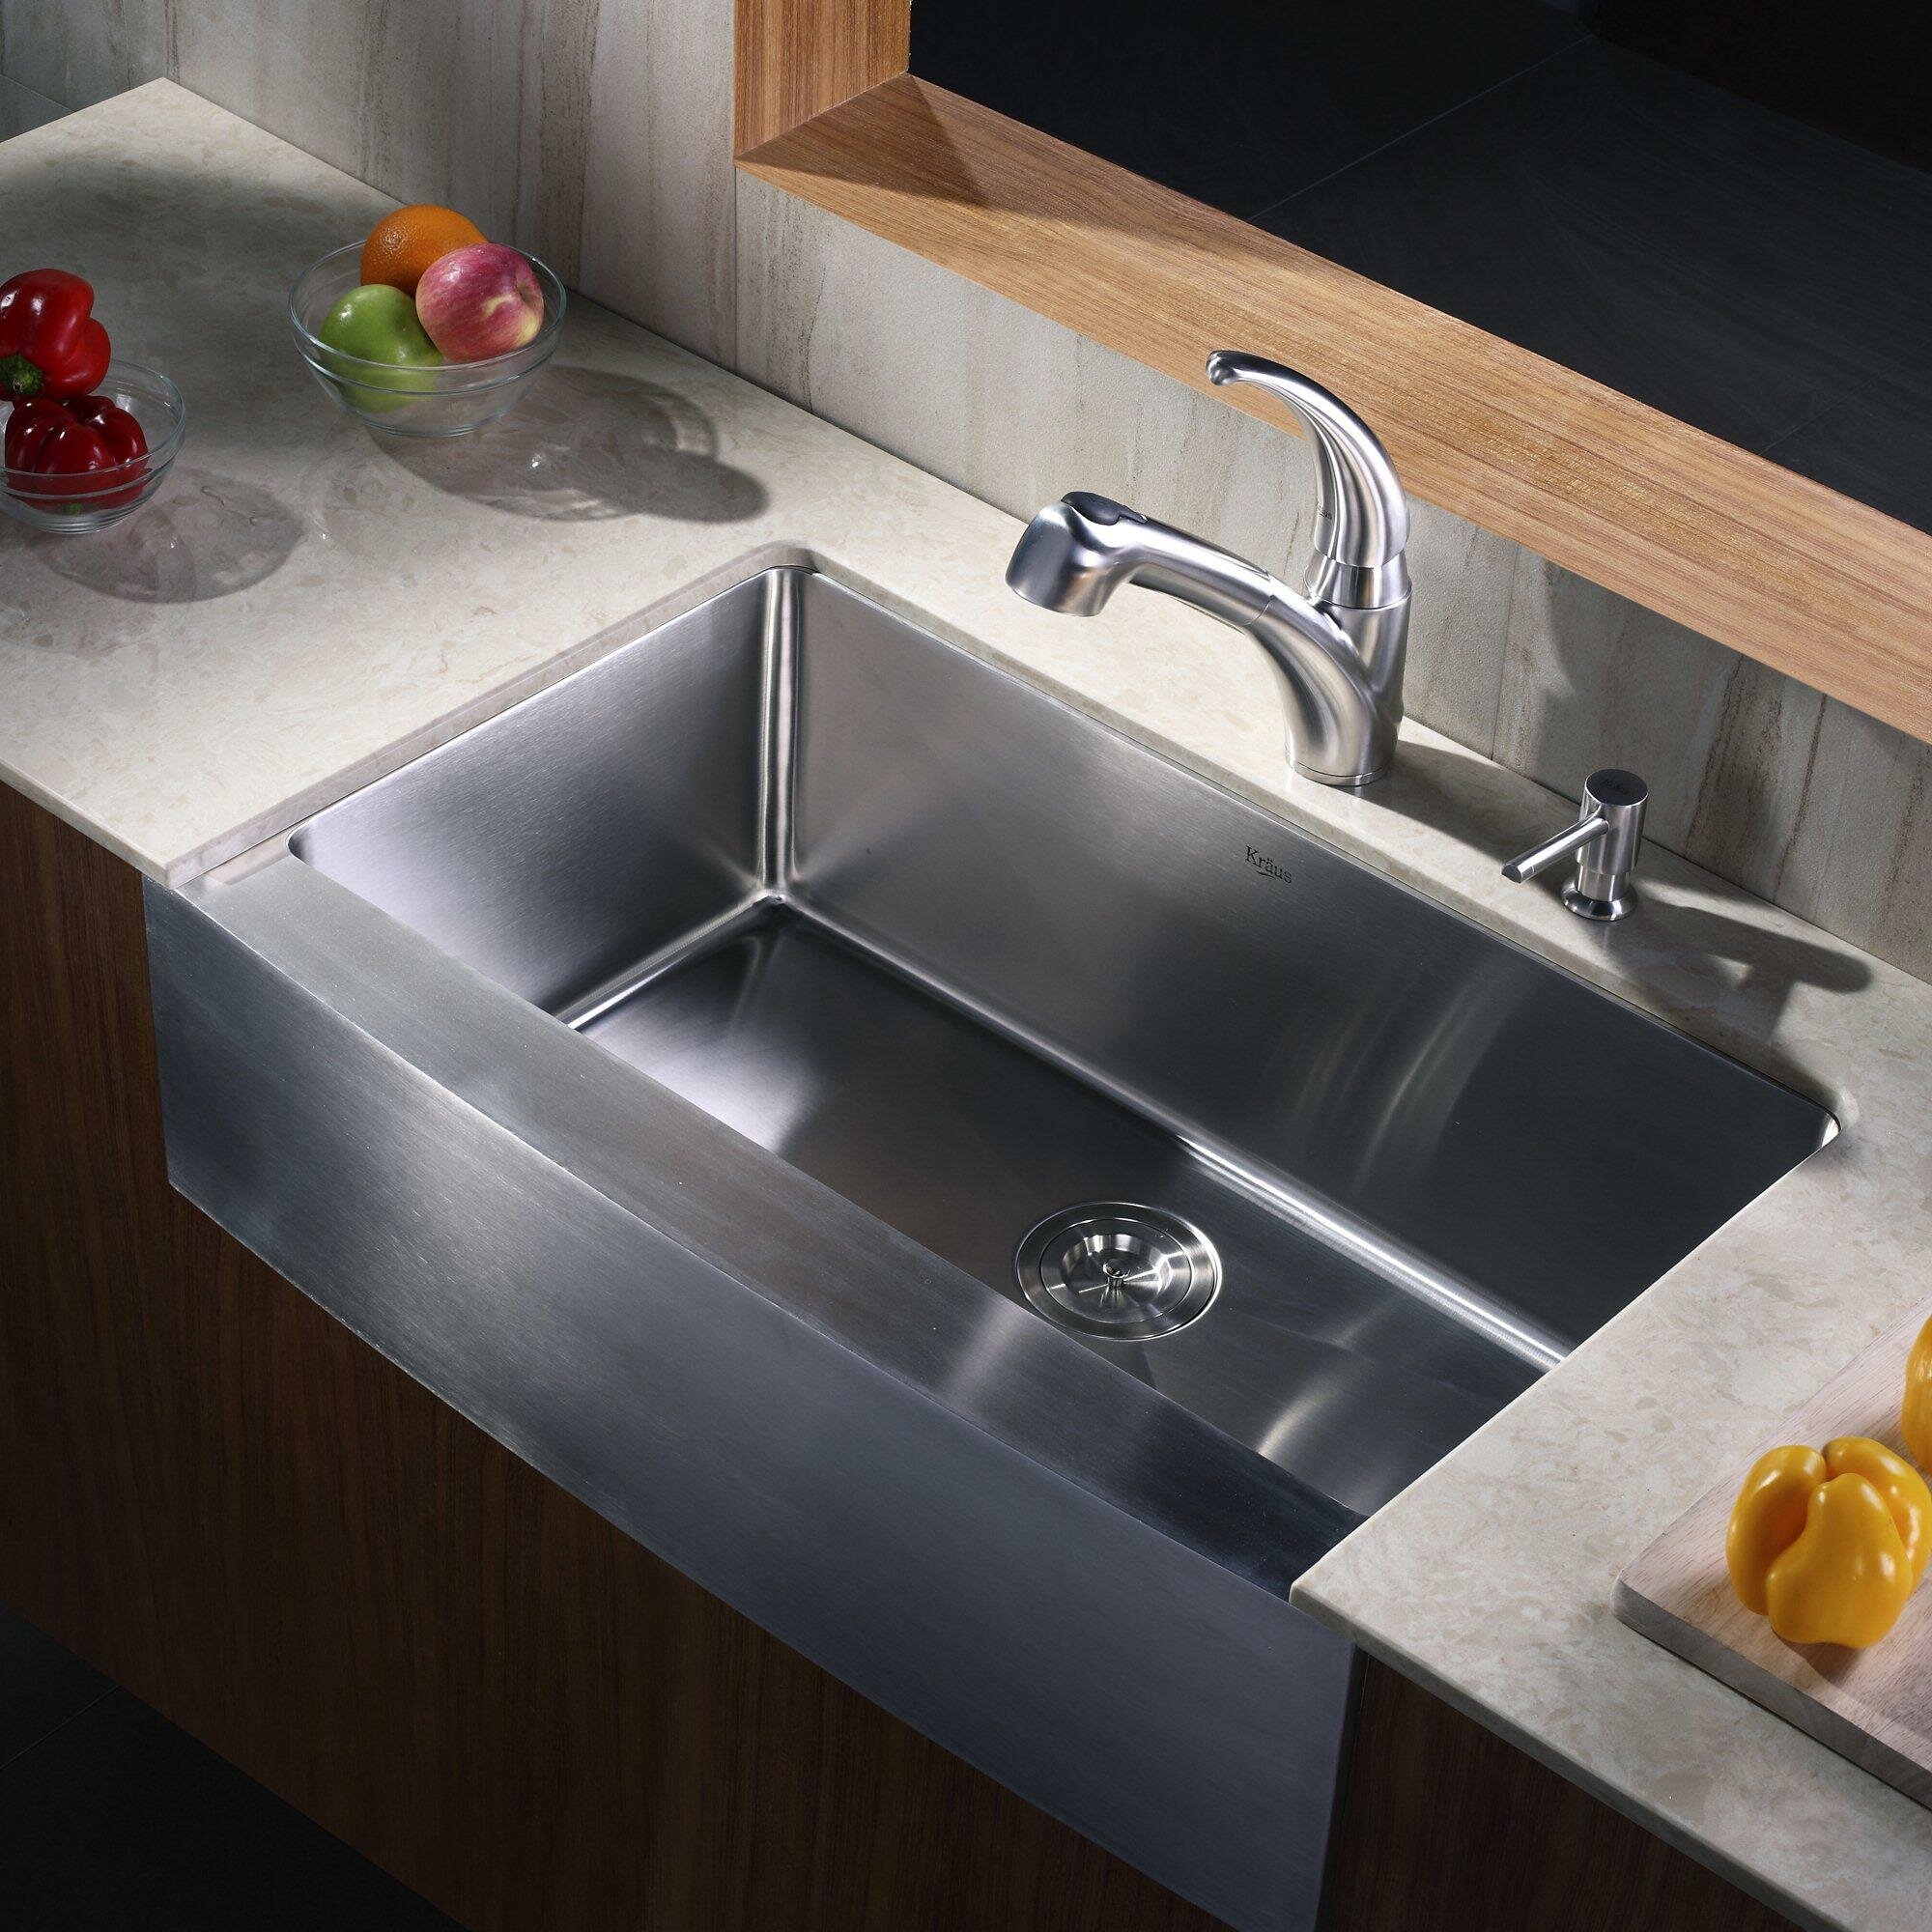 Kraus Farmhouse Kitchen Sink with Faucet and Soap ...